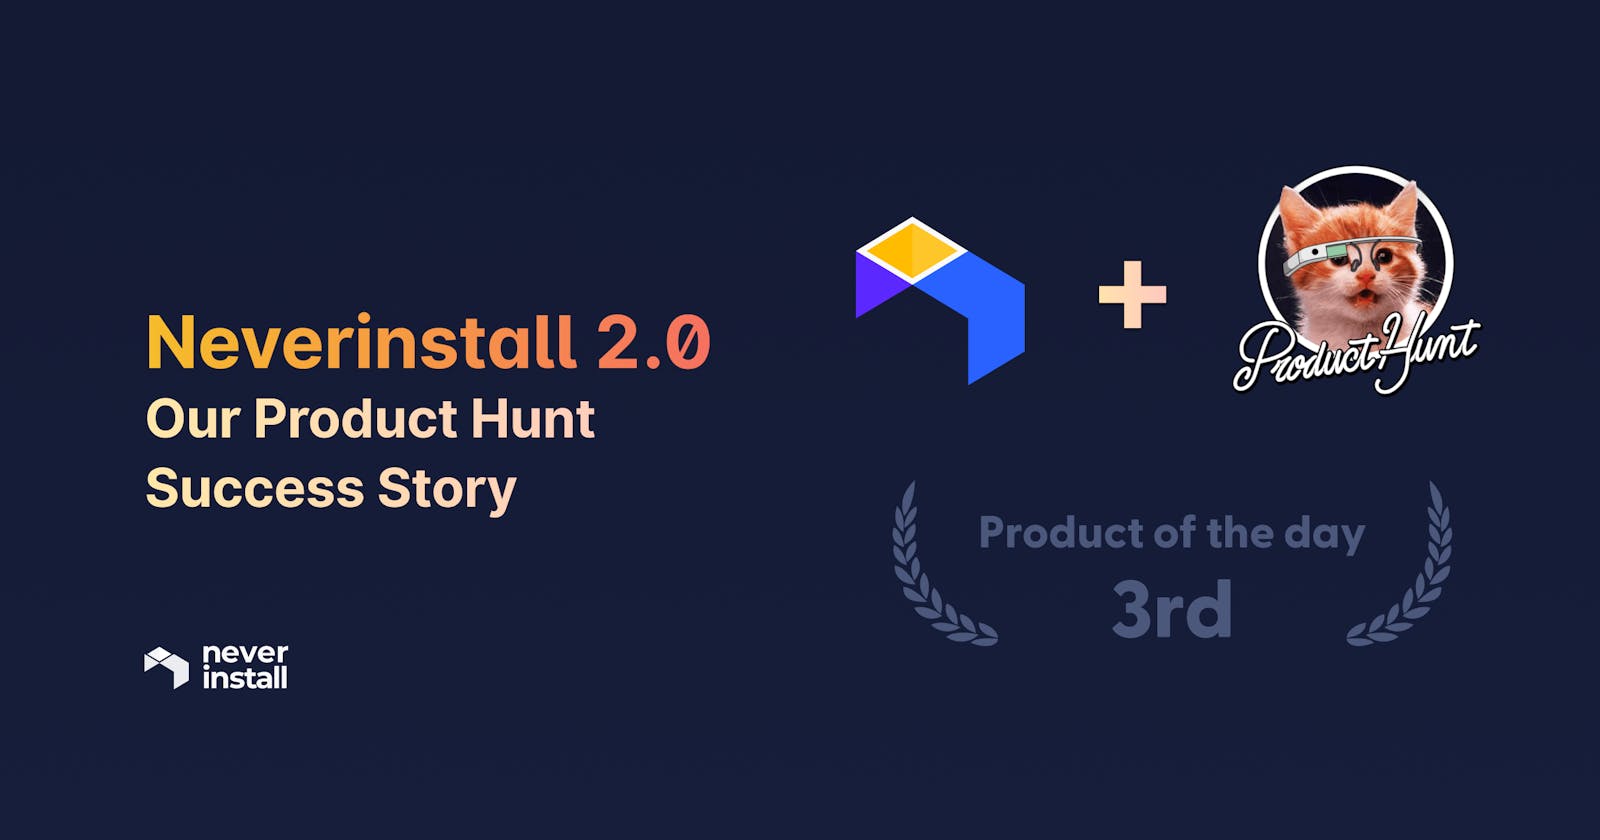 Neverinstall's Product Hunt Success Story